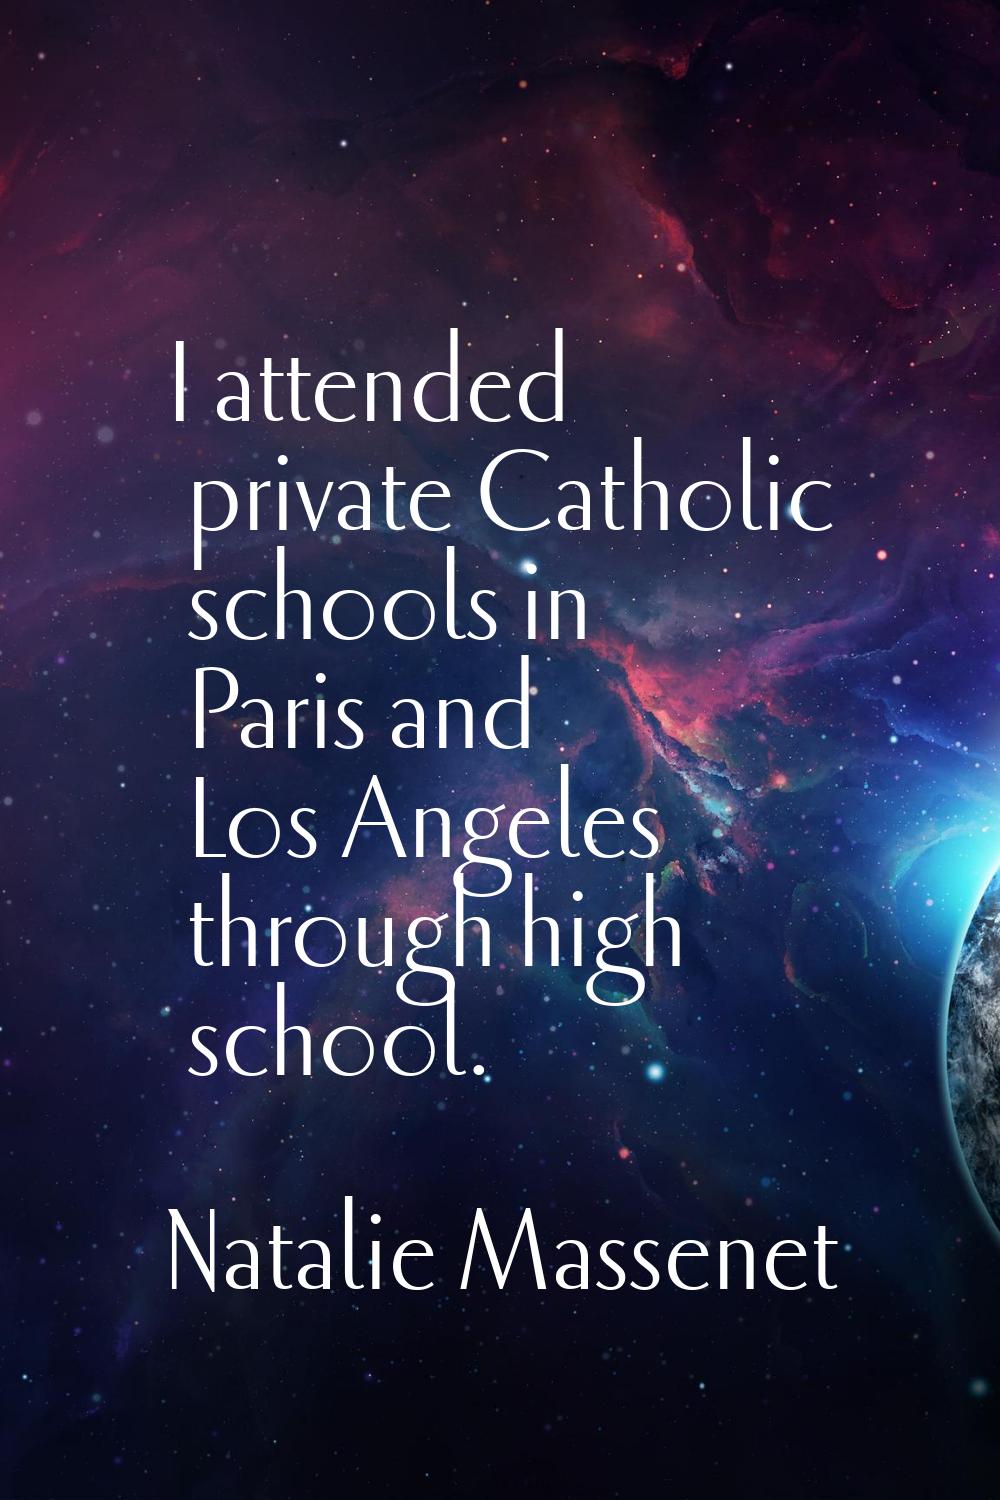 I attended private Catholic schools in Paris and Los Angeles through high school.